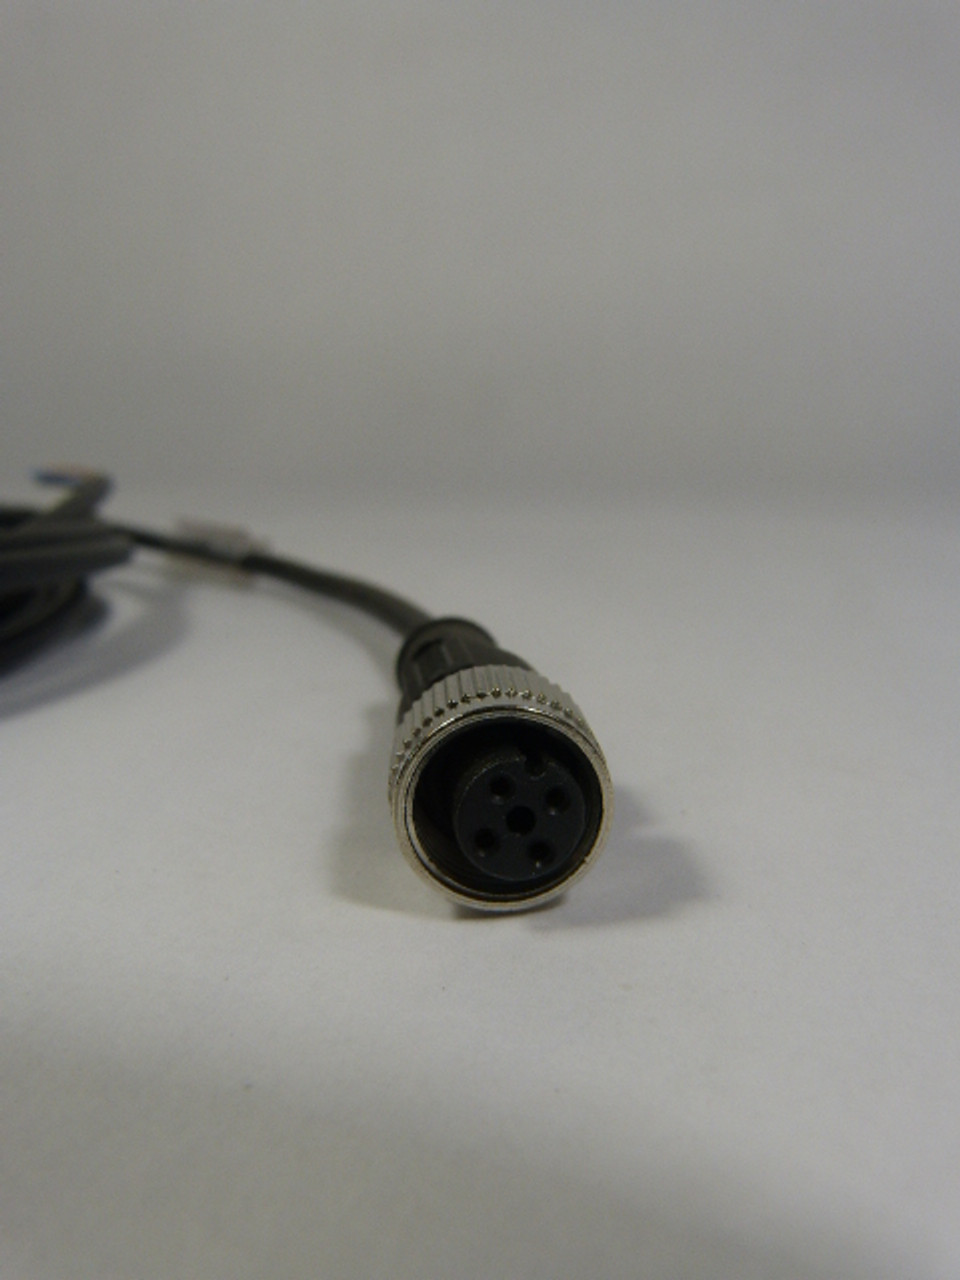 Sick DOL-1204-G05MC Cable Cordest Female 4 Pin 6025901 USED